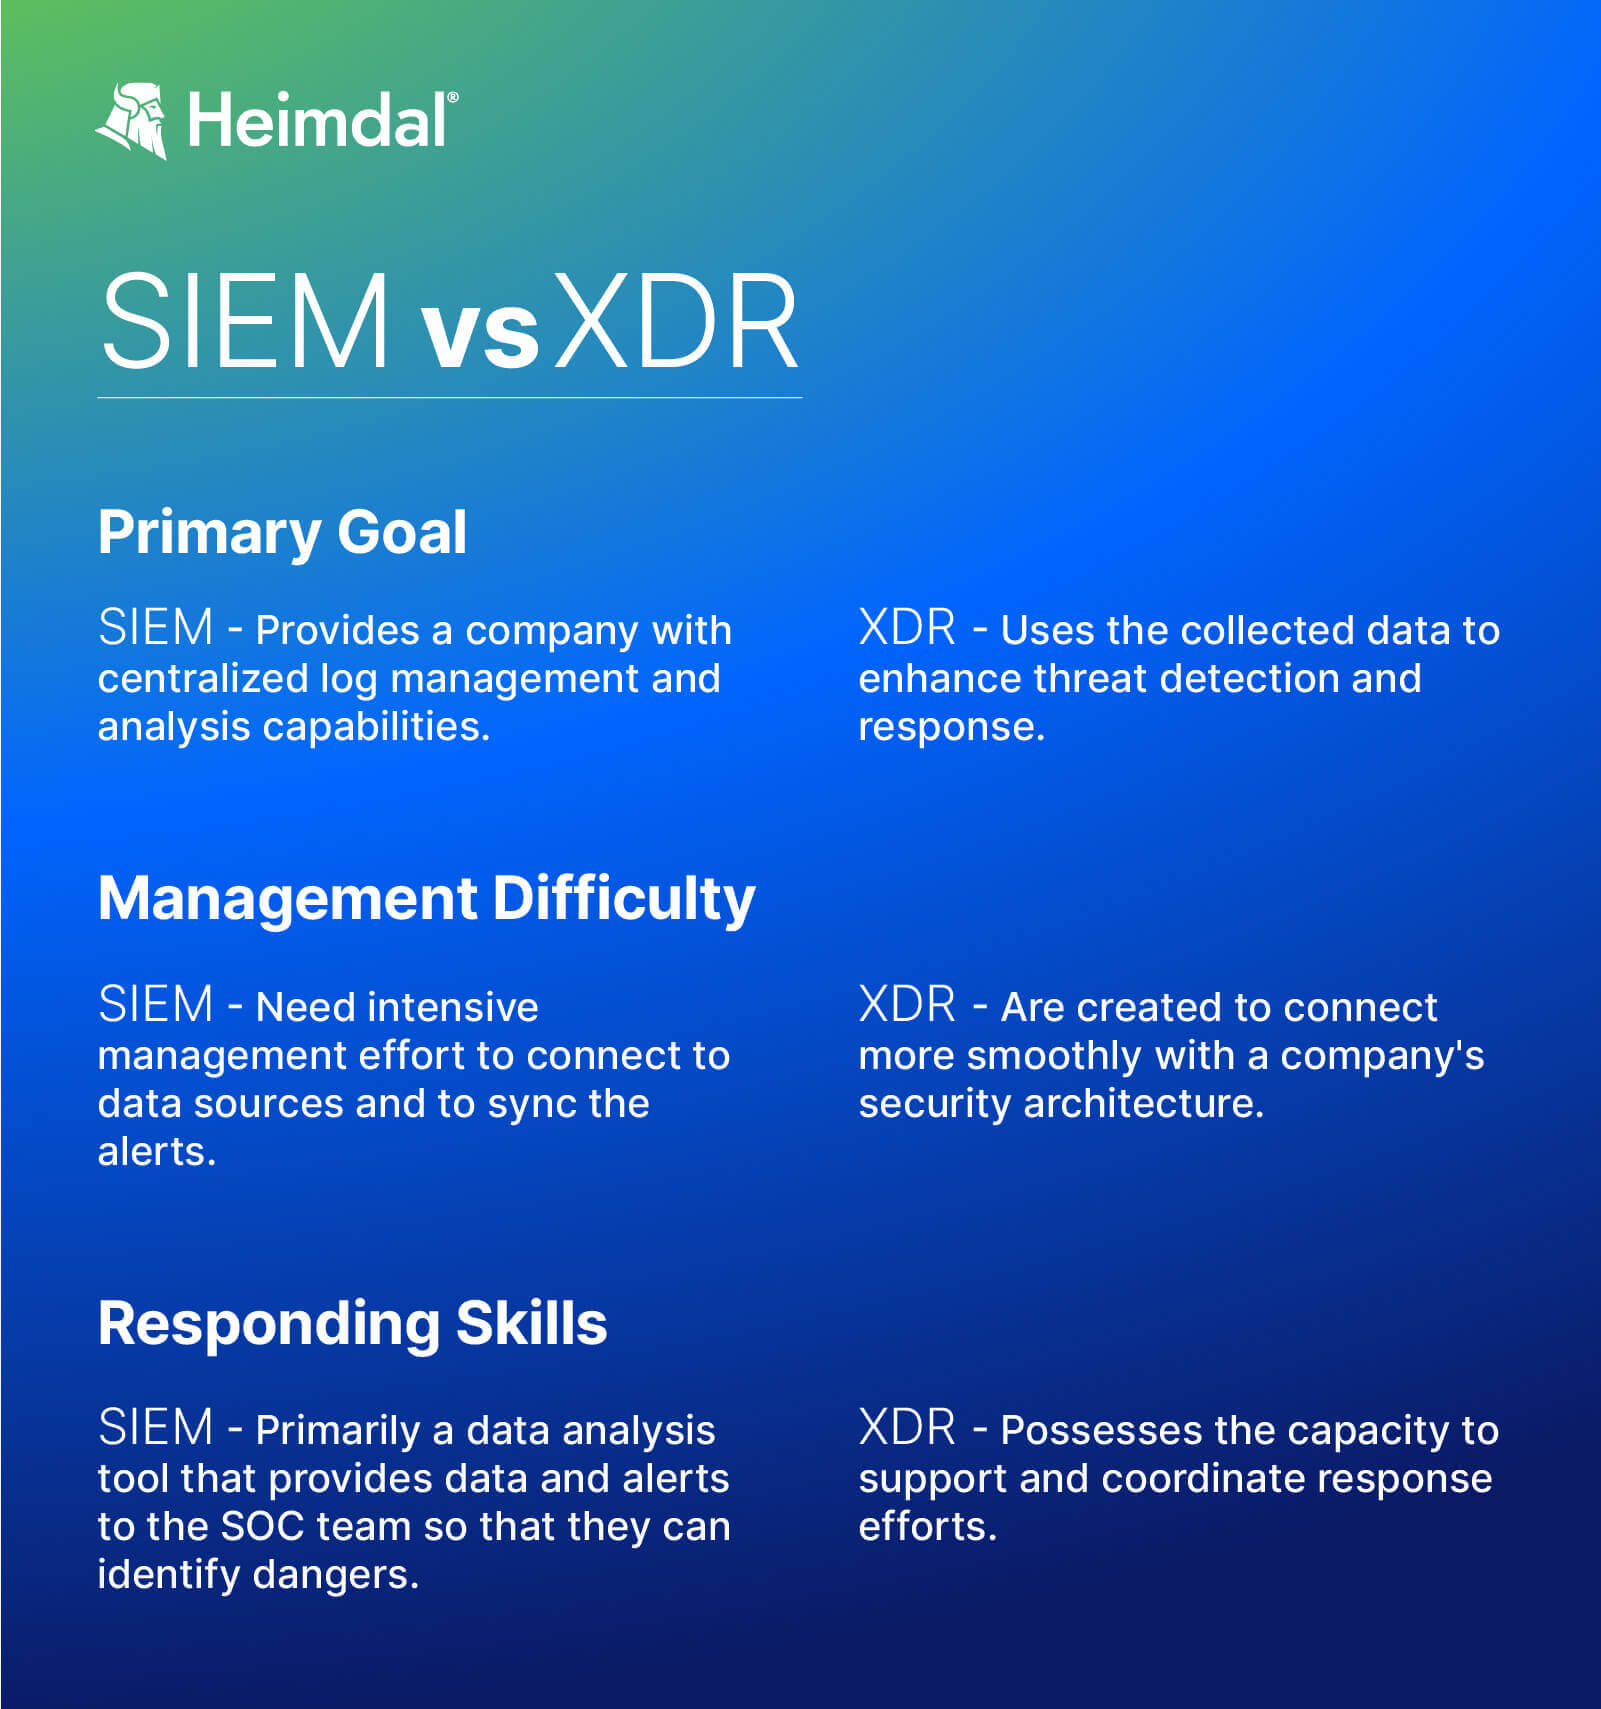 See the difference between SIEM-vs-XDR